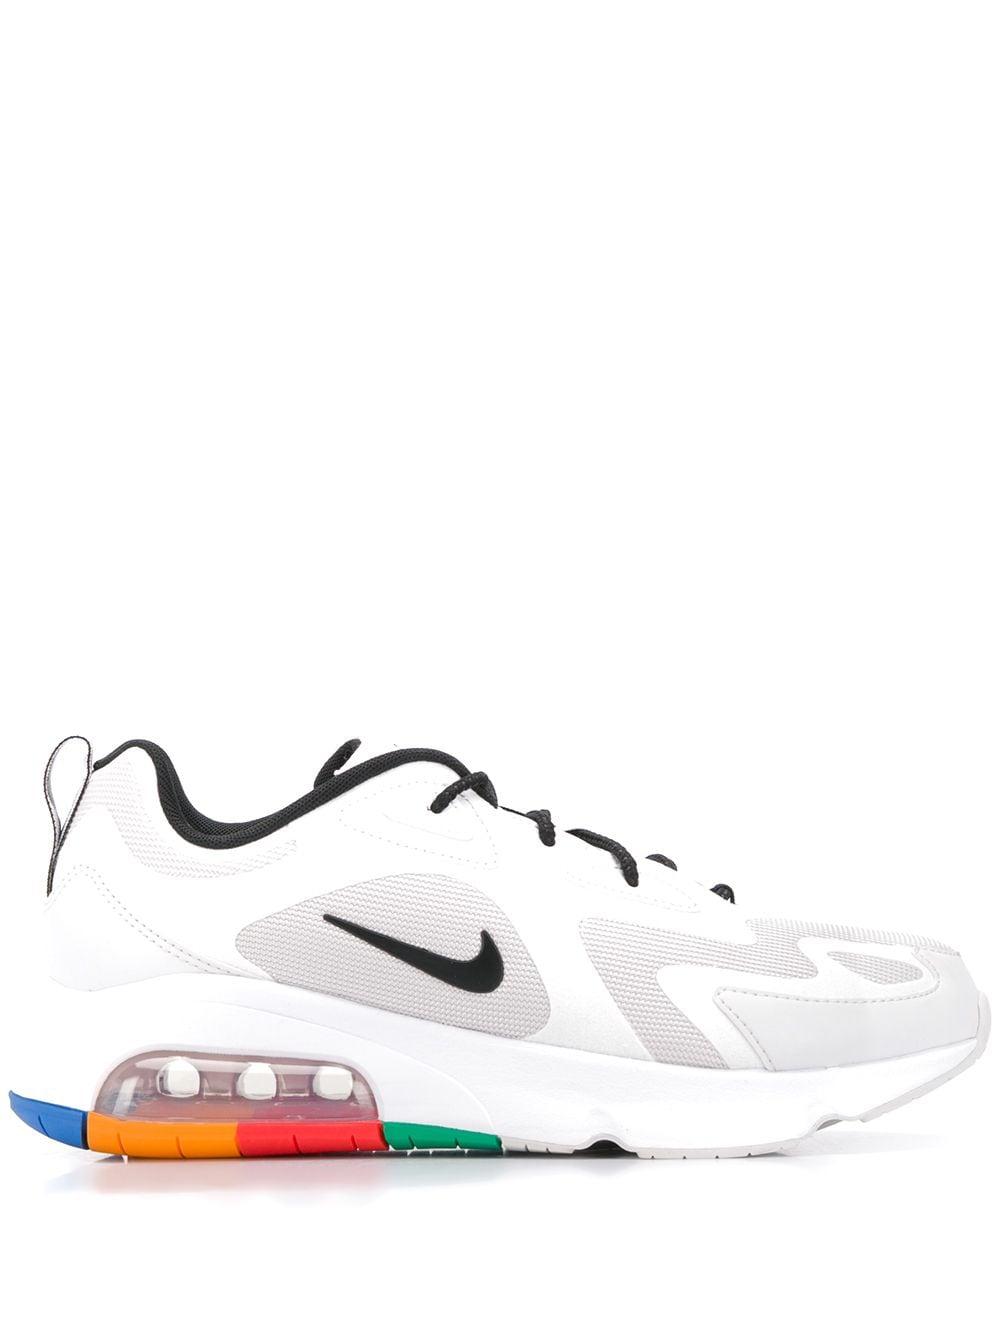 air max 200 world stage